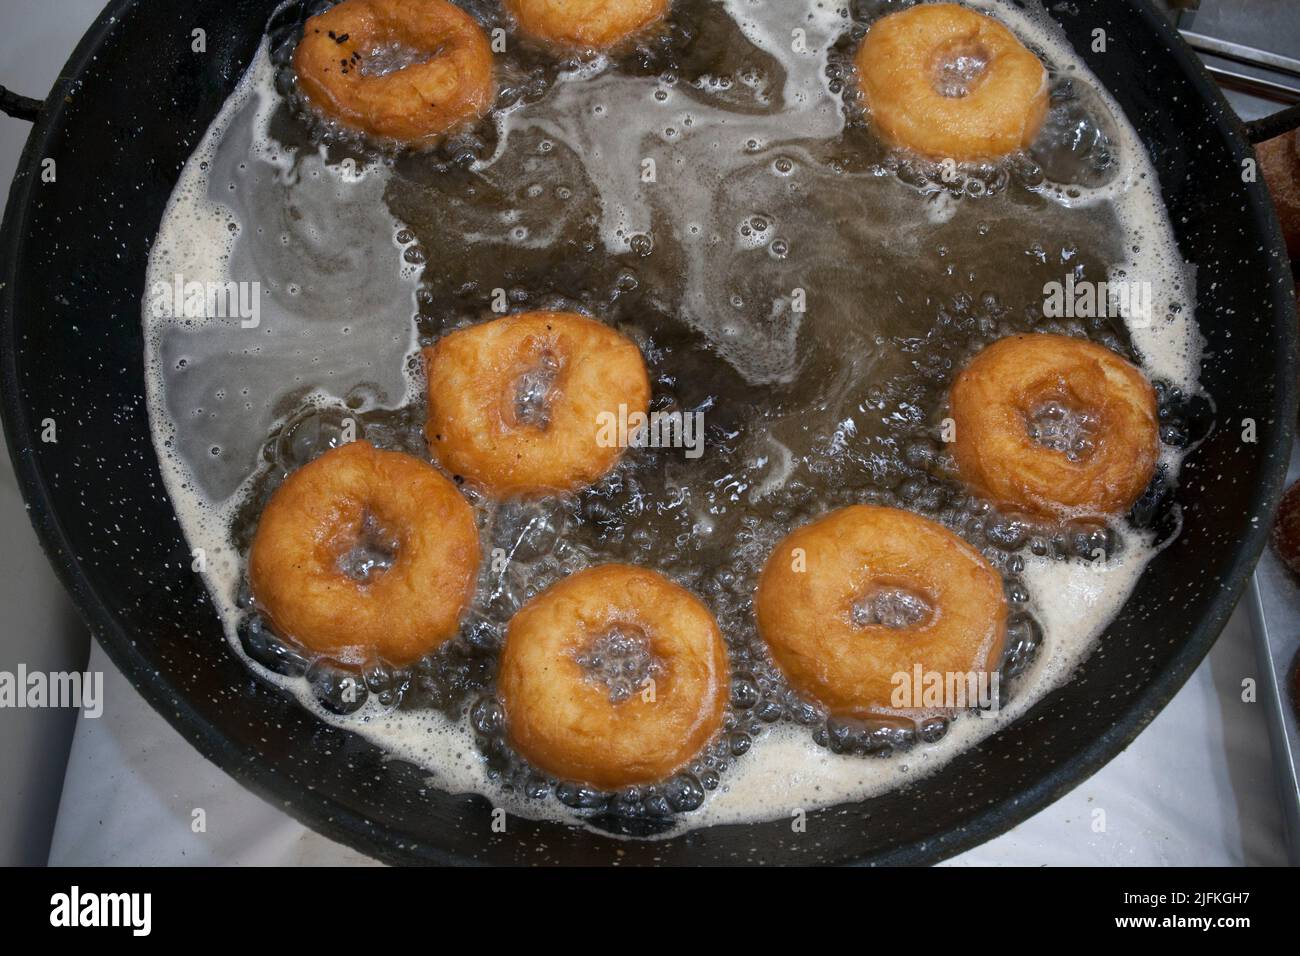 Elaboration process of spanish typical fried donuts or roscas fritas. Overhead view. Stock Photo